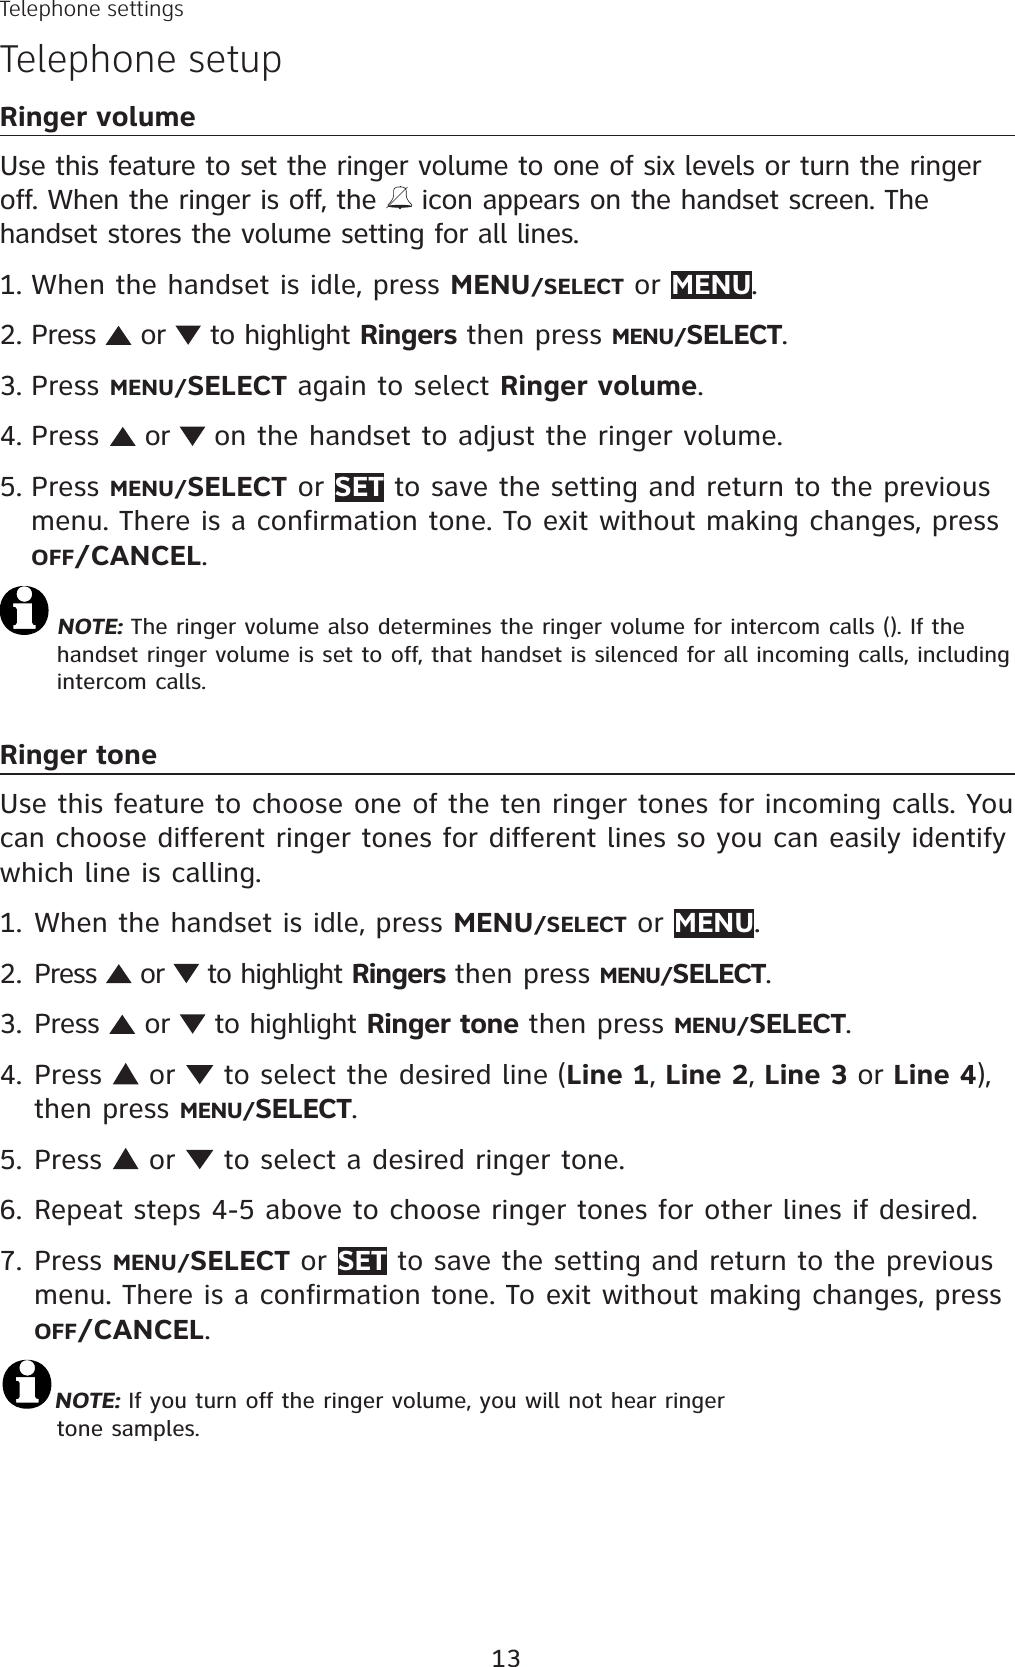 13Telephone settingsTelephone setupRinger volumeUse this feature to set the ringer volume to one of six levels or turn the ringer off. When the ringer is off, the   icon appears on the handset screen. The handset stores the volume setting for all lines. When the handset is idle, press MENU/SELECT or MENU.Press   or   to highlight Ringers then press MENU/SELECT.Press MENU/SELECT again to select Ringer volume.Press   or  on the handset to adjust the ringer volume. Press MENU/SELECT or SET to save the setting and return to the previous menu. There is a confirmation tone. To exit without making changes, press OFF/CANCEL.NOTE: The ringer volume also determines the ringer volume for intercom calls (). If the handset ringer volume is set to off, that handset is silenced for all incoming calls, including intercom calls.Ringer toneUse this feature to choose one of the ten ringer tones for incoming calls. You can choose different ringer tones for different lines so you can easily identify which line is calling.When the handset is idle, press MENU/SELECT or MENU.Press   or   to highlight Ringers then press MENU/SELECT.Press   or   to highlight Ringer tone then press MENU/SELECT.Press   or  to select the desired line (Line 1, Line 2, Line 3 or Line 4),then press MENU/SELECT.Press   or   to select a desired ringer tone. Repeat steps 4-5 above to choose ringer tones for other lines if desired.Press MENU/SELECT or SET to save the setting and return to the previous menu. There is a confirmation tone. To exit without making changes, press OFF/CANCEL.NOTE: If you turn off the ringer volume, you will not hear ringer tone samples. 1.2.3.4.5.1.2.3.4.5.6.7.